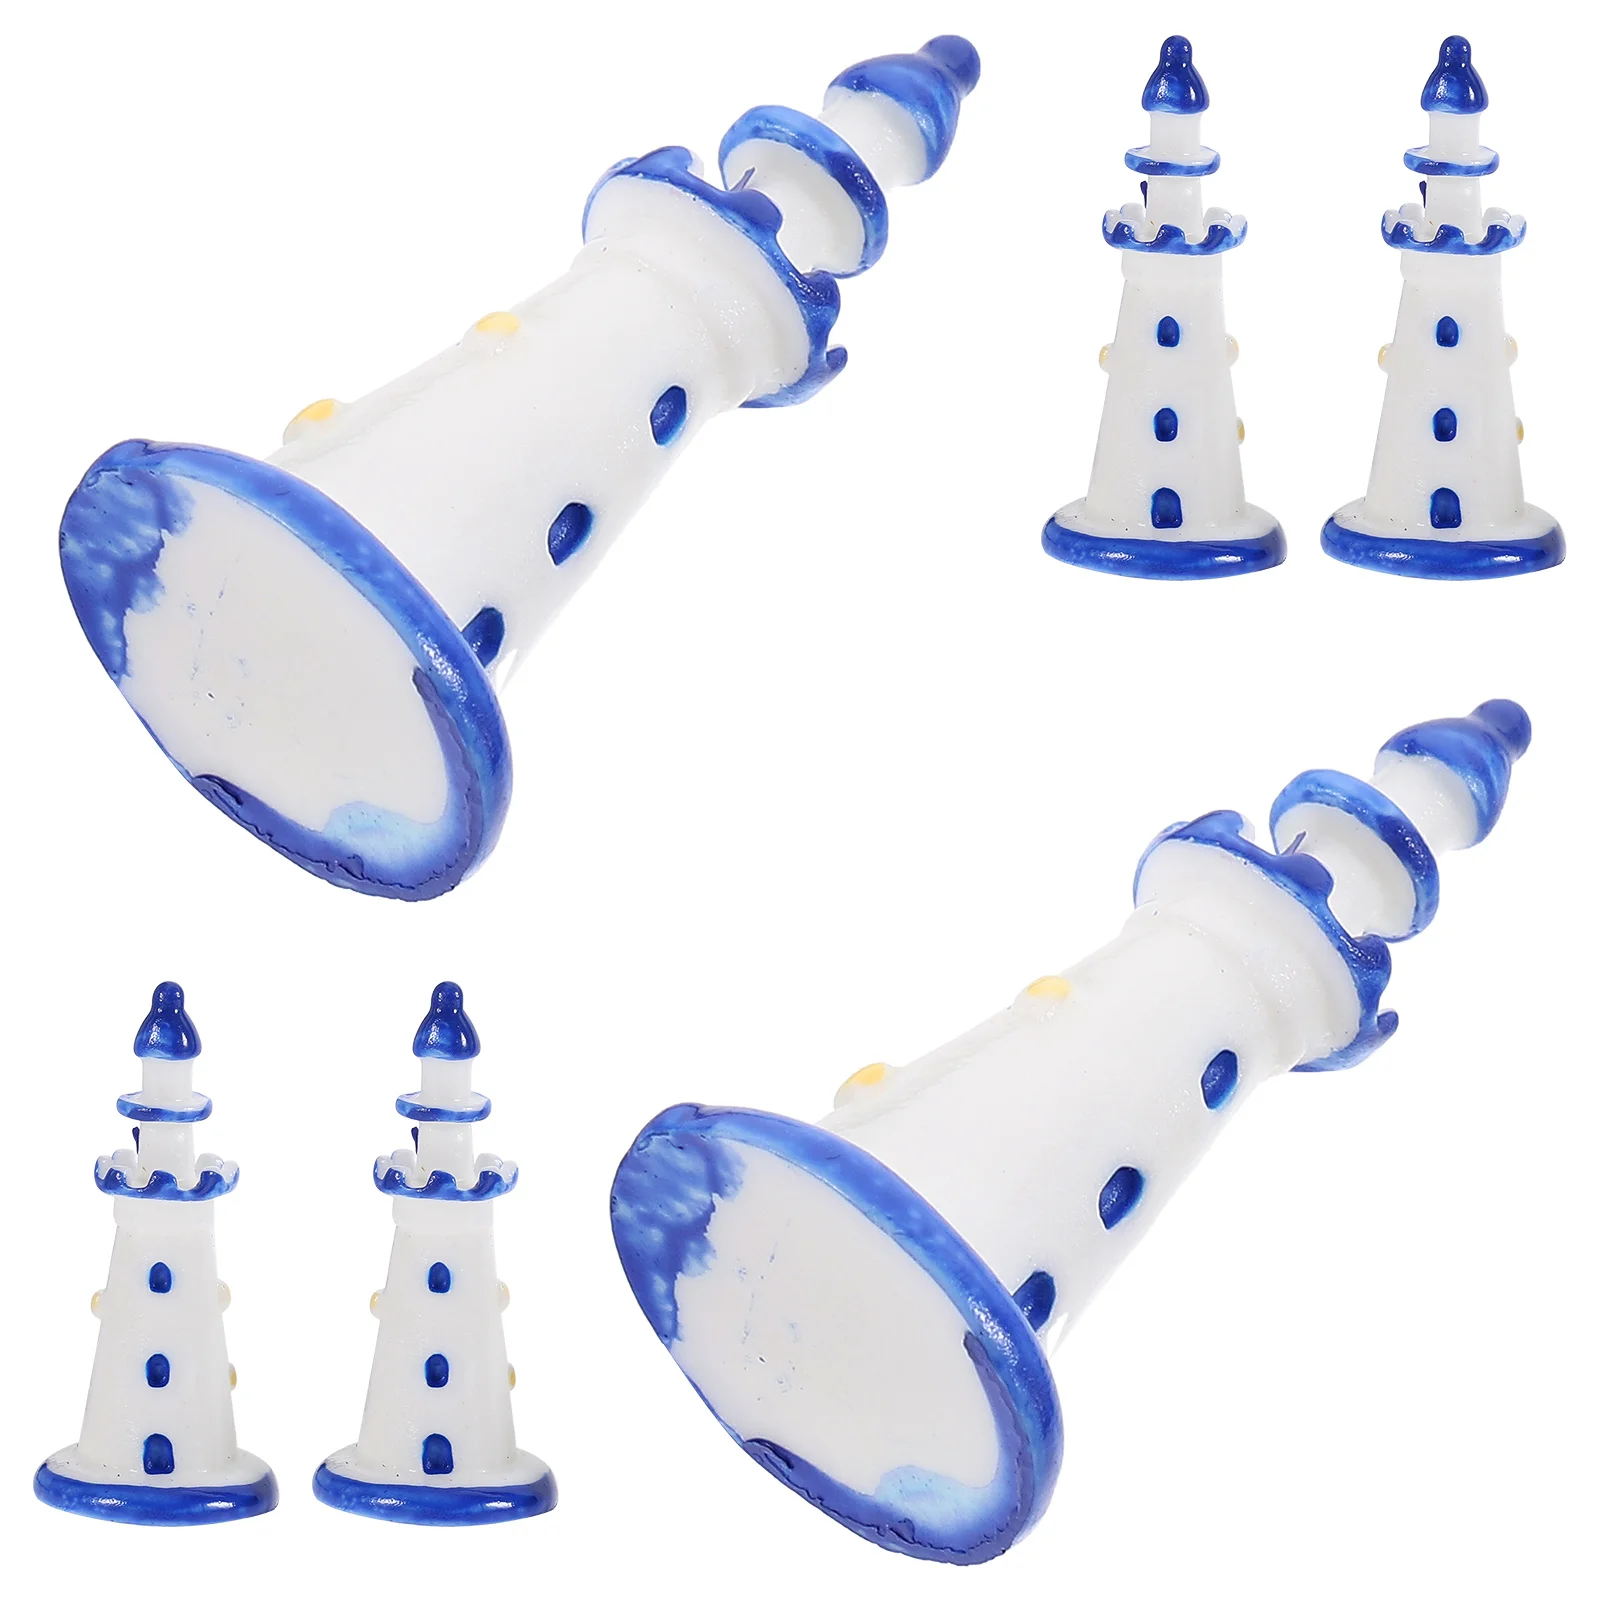 10 Pcs Household Mini Lighthouse Home Decor Scenery Decorations Resin Photography Props newborn baby boys photography props vintage hongkong style landlord outfits backdrops mini creatives studio shooting photo props